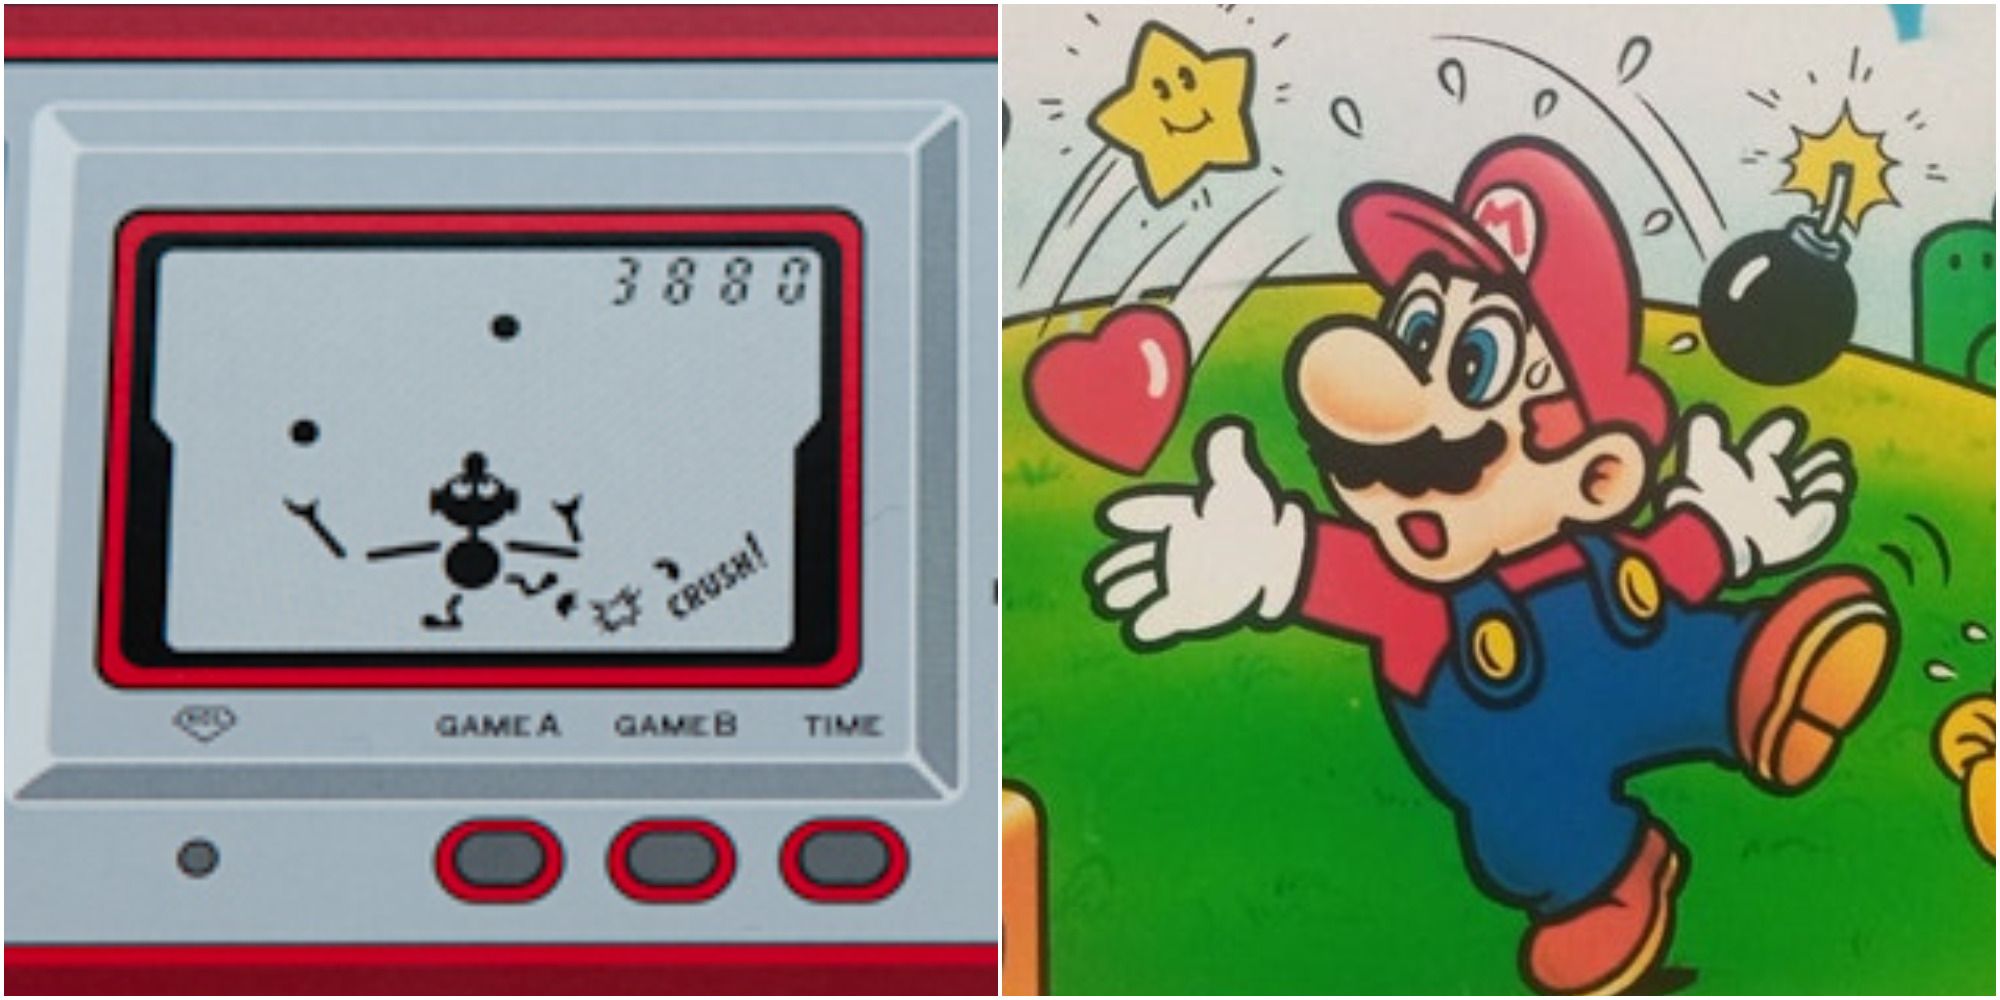 First Game & Watch with ball and Mario the Juggler art